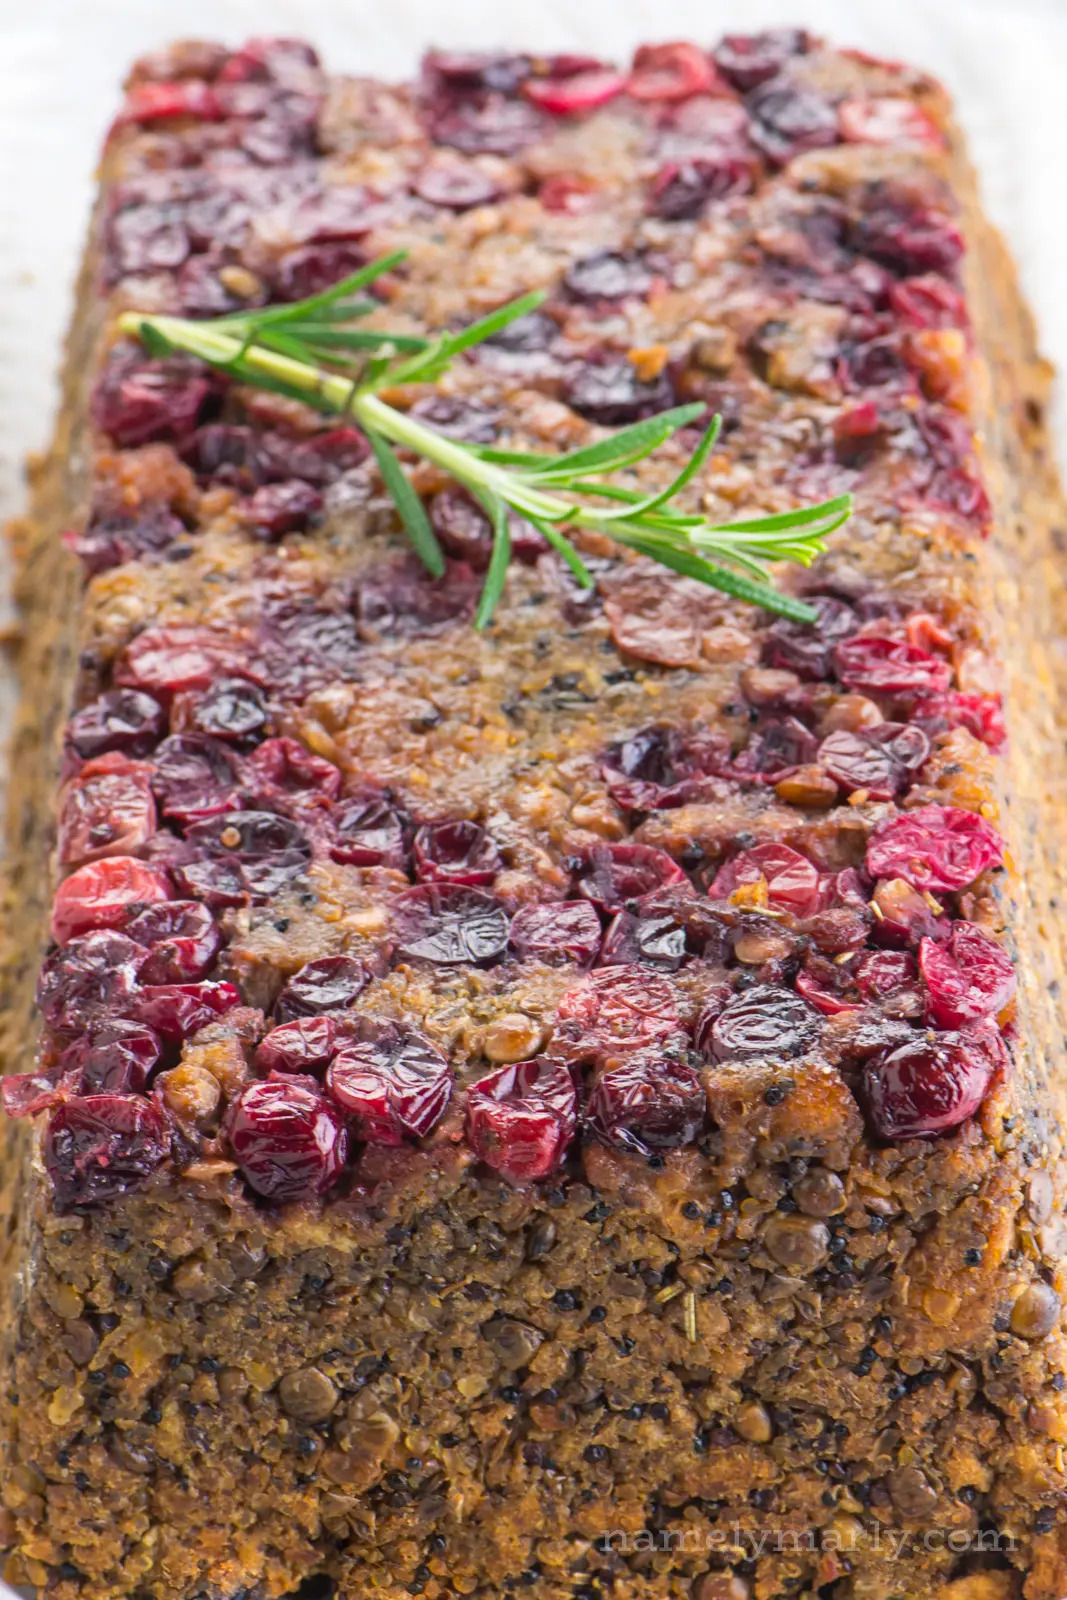 A view of the top of holiday lentil loaf showing the layer of cranberries on top.